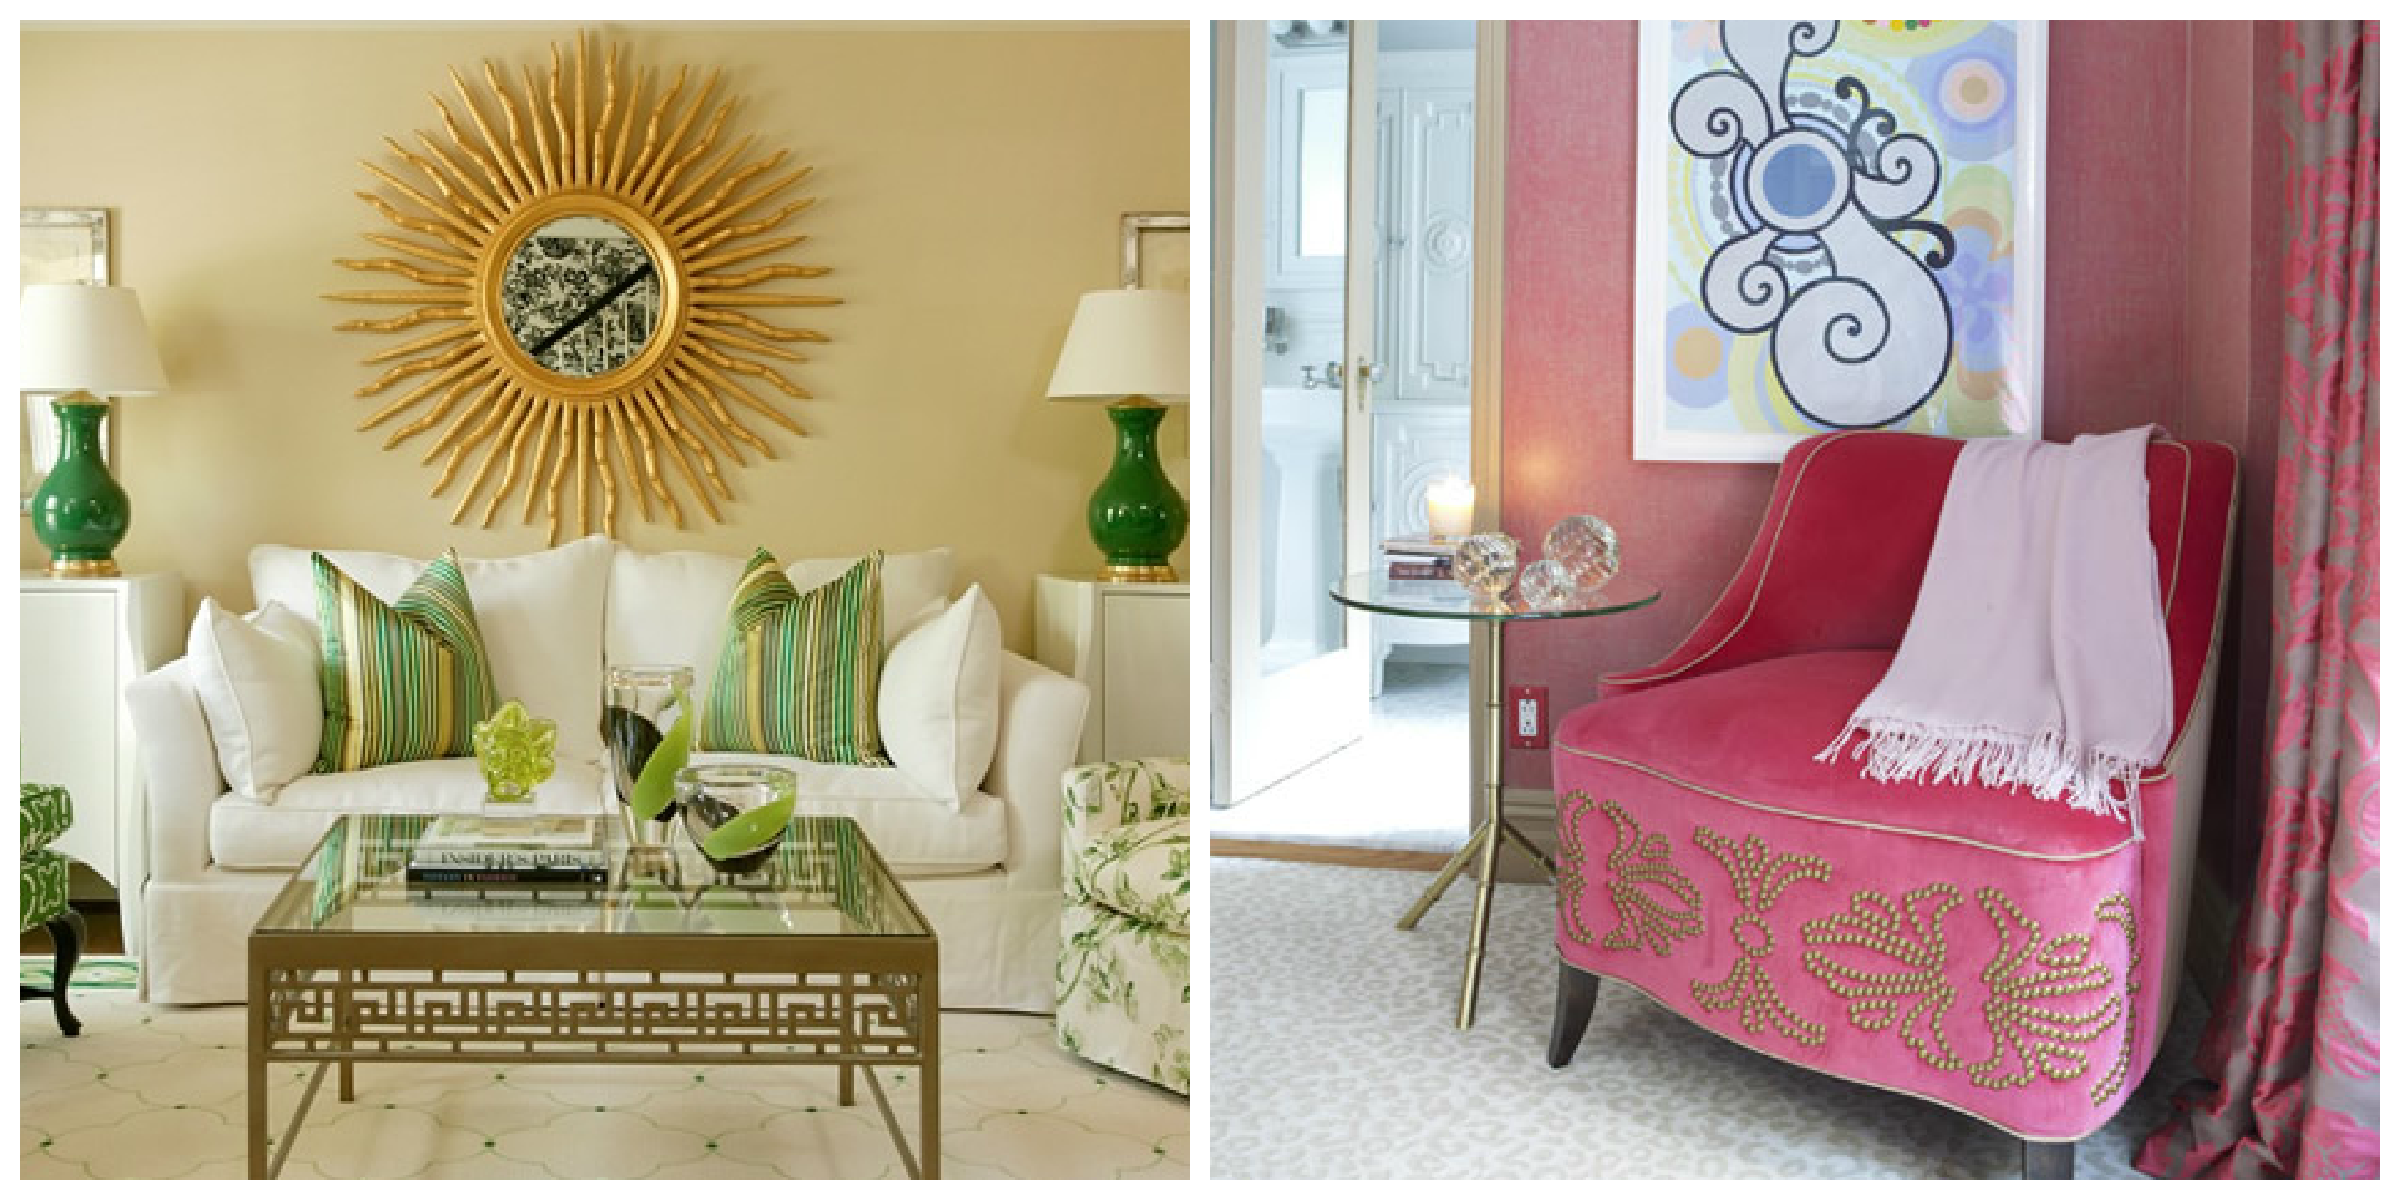 Bright colors for Spring time in your home.